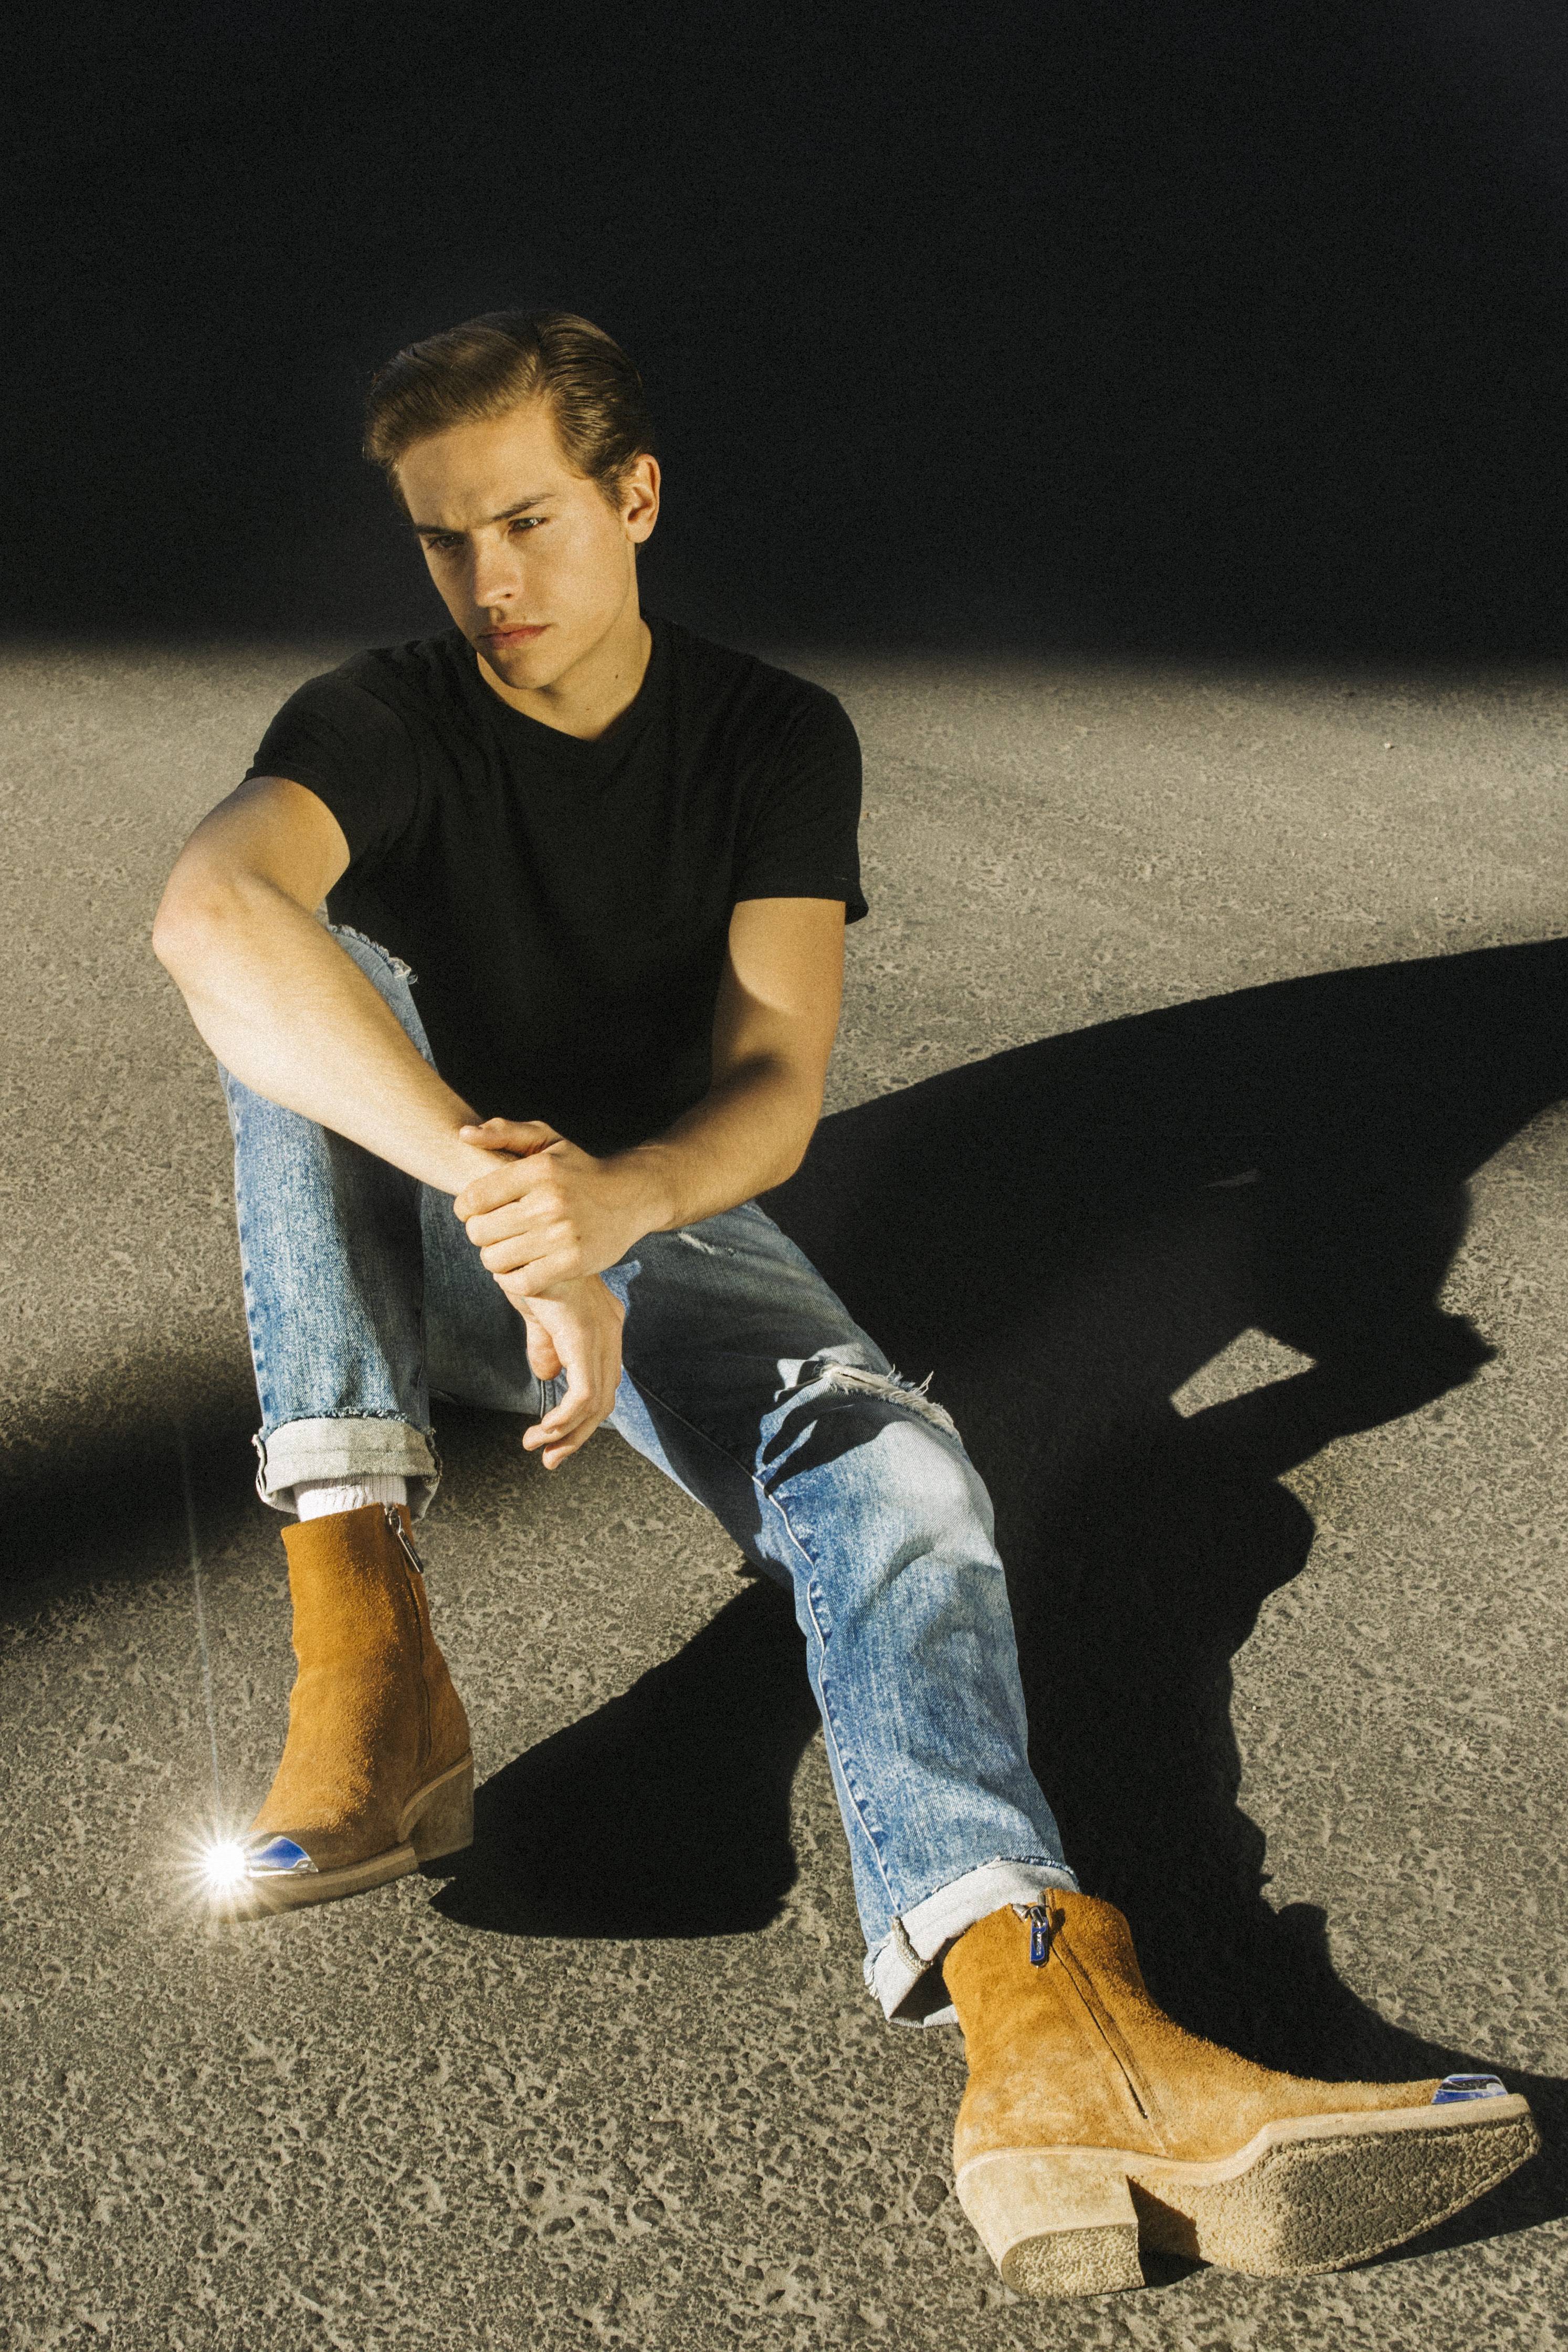 Dylan Sprouse looking handsome in a black shirt and denim jeans with brown shoes to match.